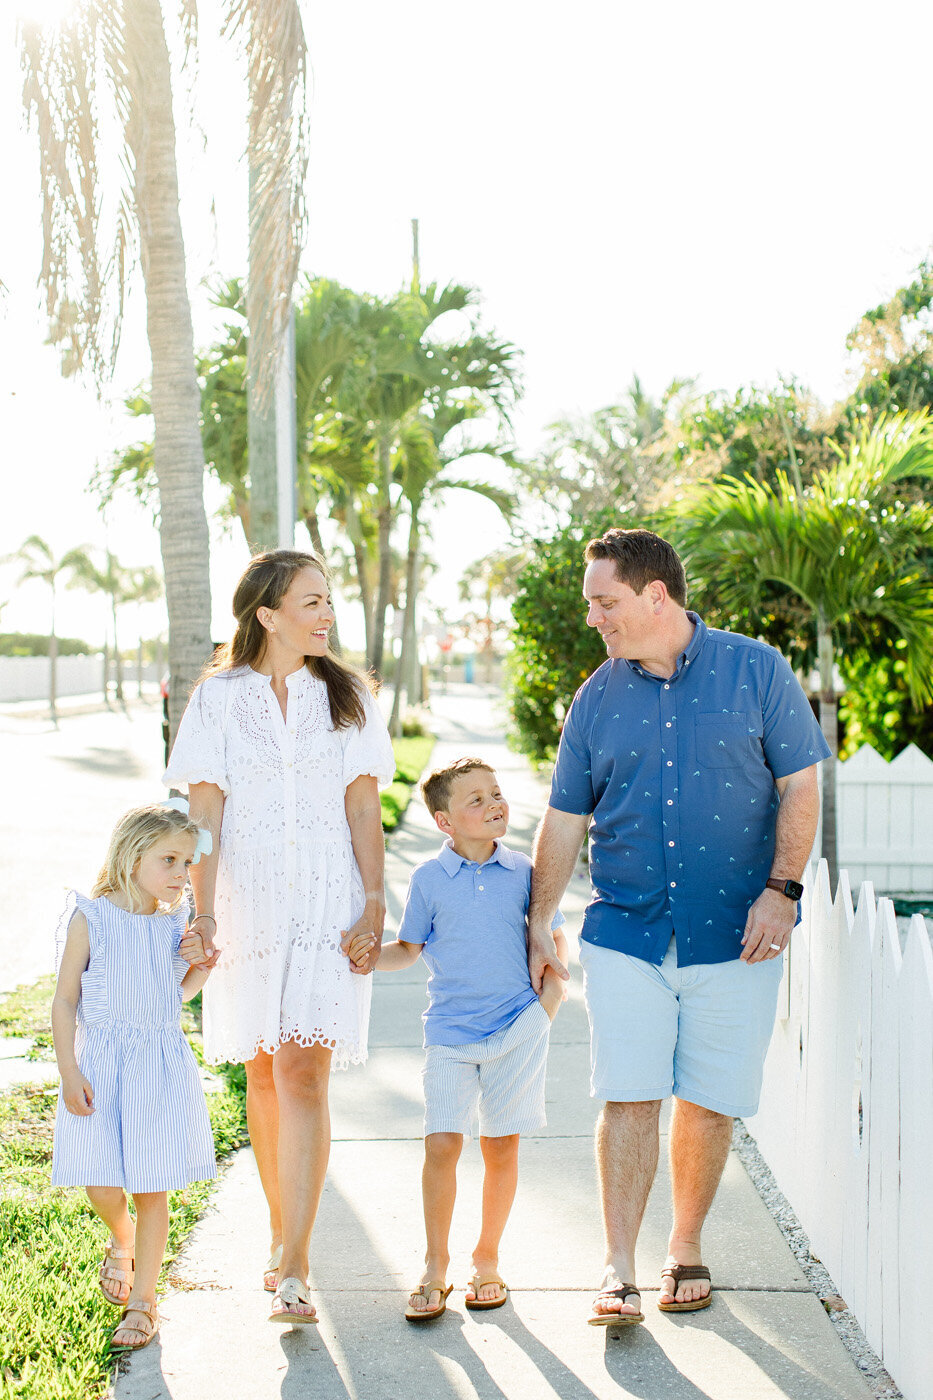 Tampa Family Photographer - Ailyn LaTorre 33